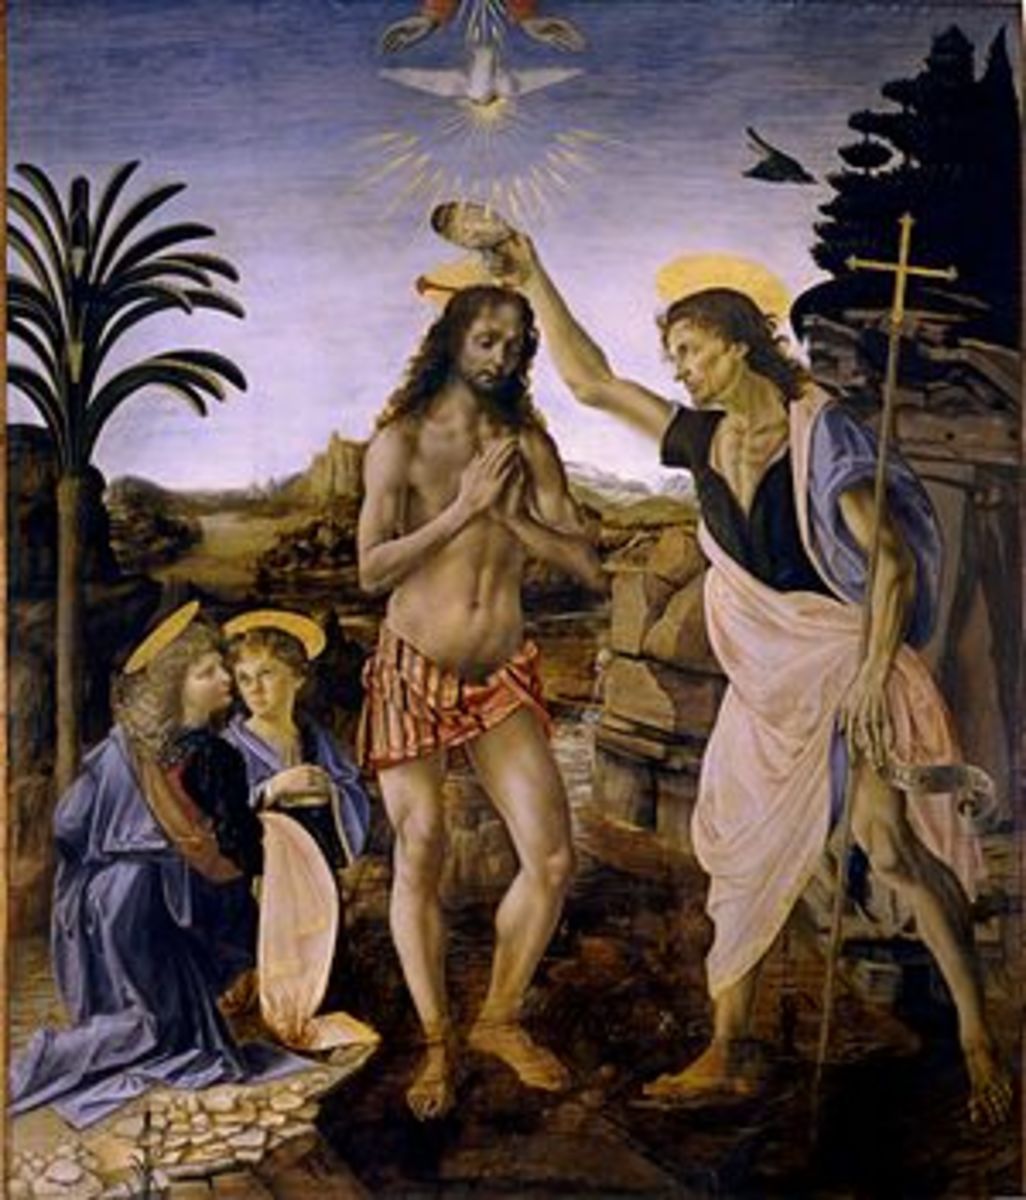 "The Baptism of Christ", a collaboration between painter Andrea del Verrocchio and a young Leonardo de Vinci, generally believed to have been completed around the year 1475 